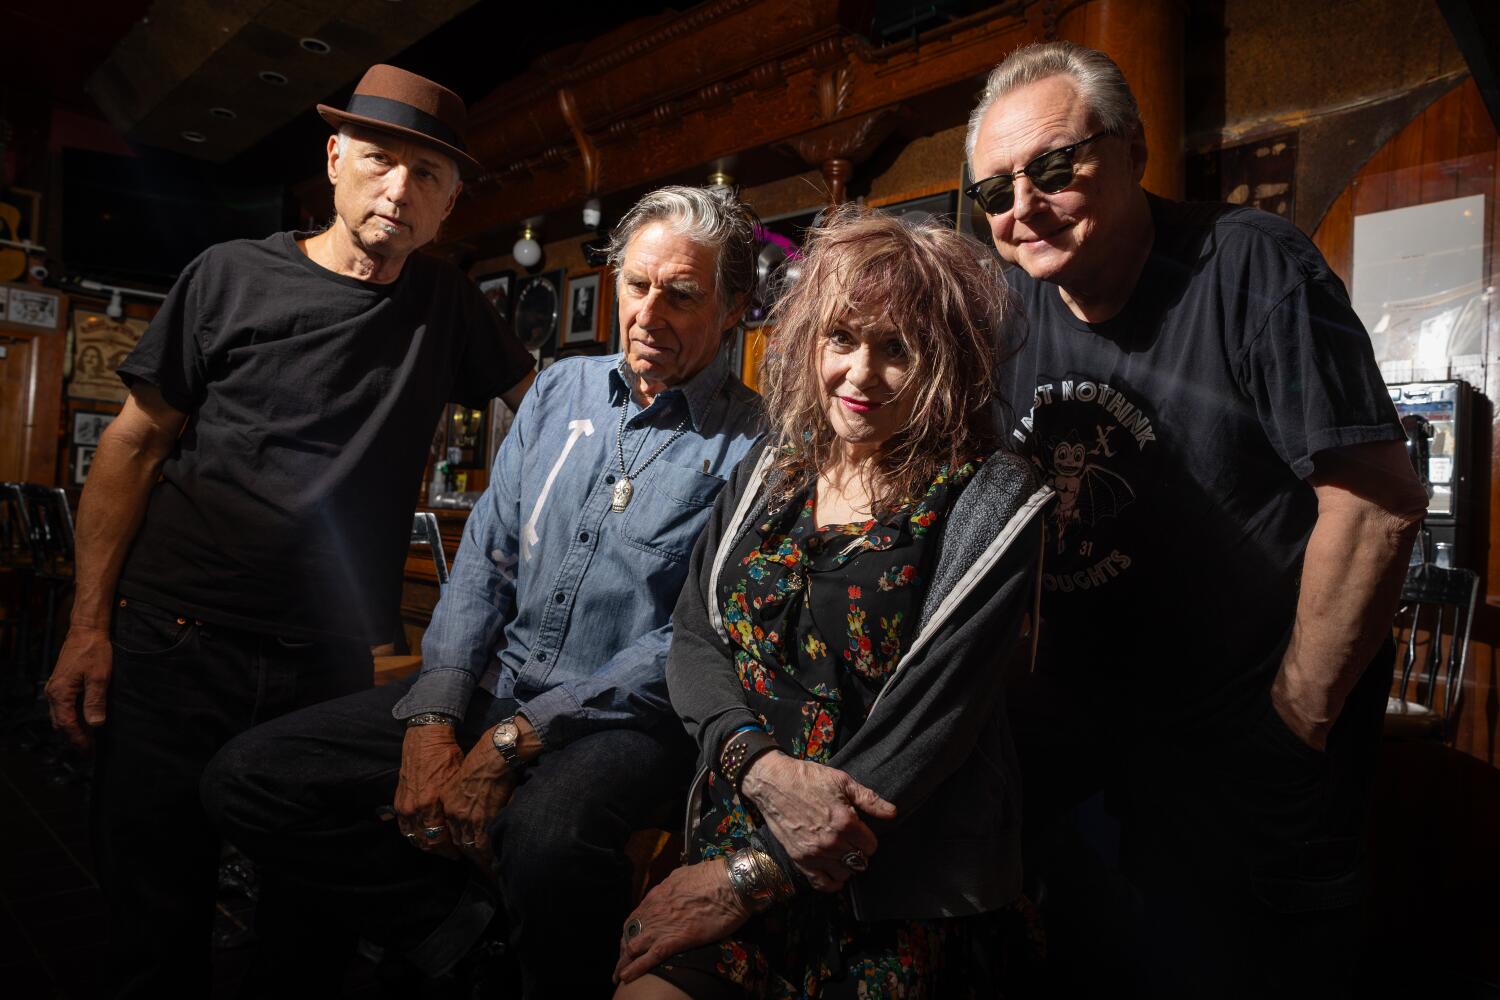 X marks the end: L.A. punk band winds down after nearly 50 years together